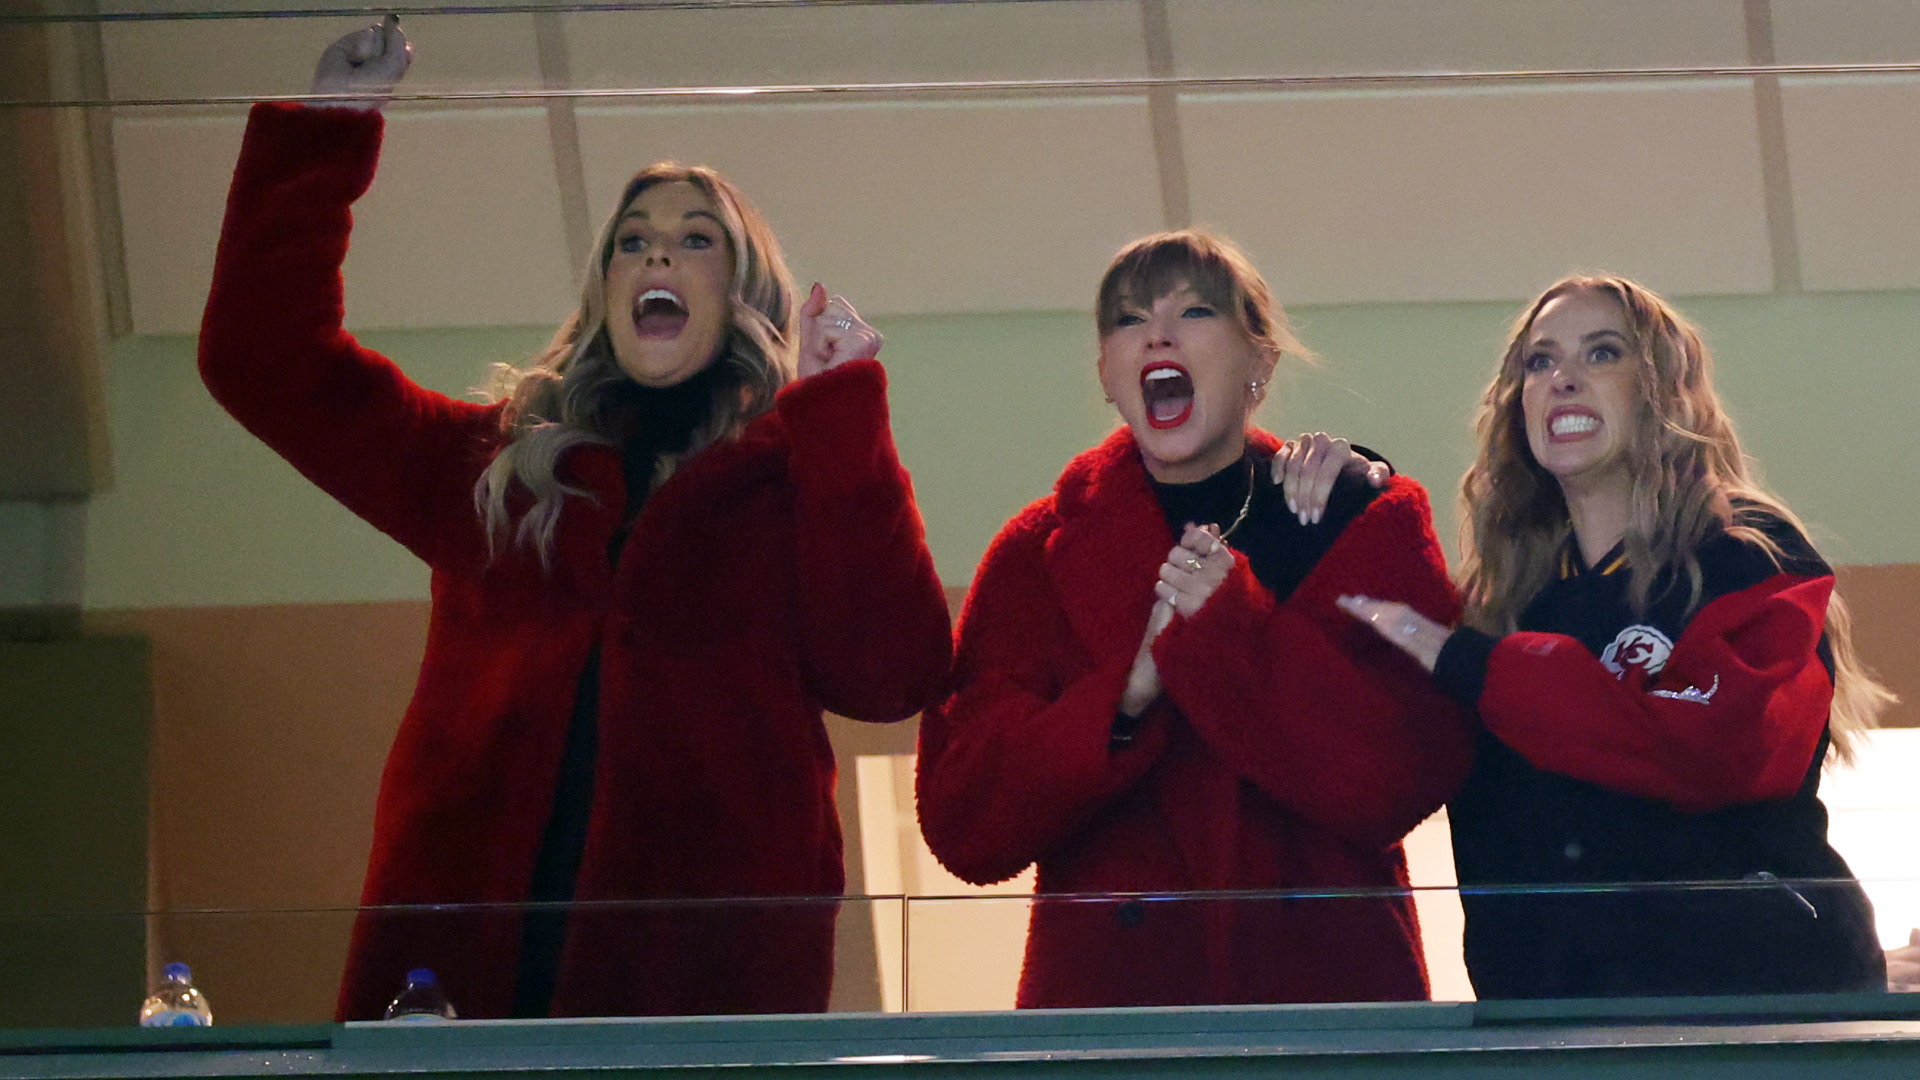 Taylor Swift in a red peacoat cheering with friends at a football game.